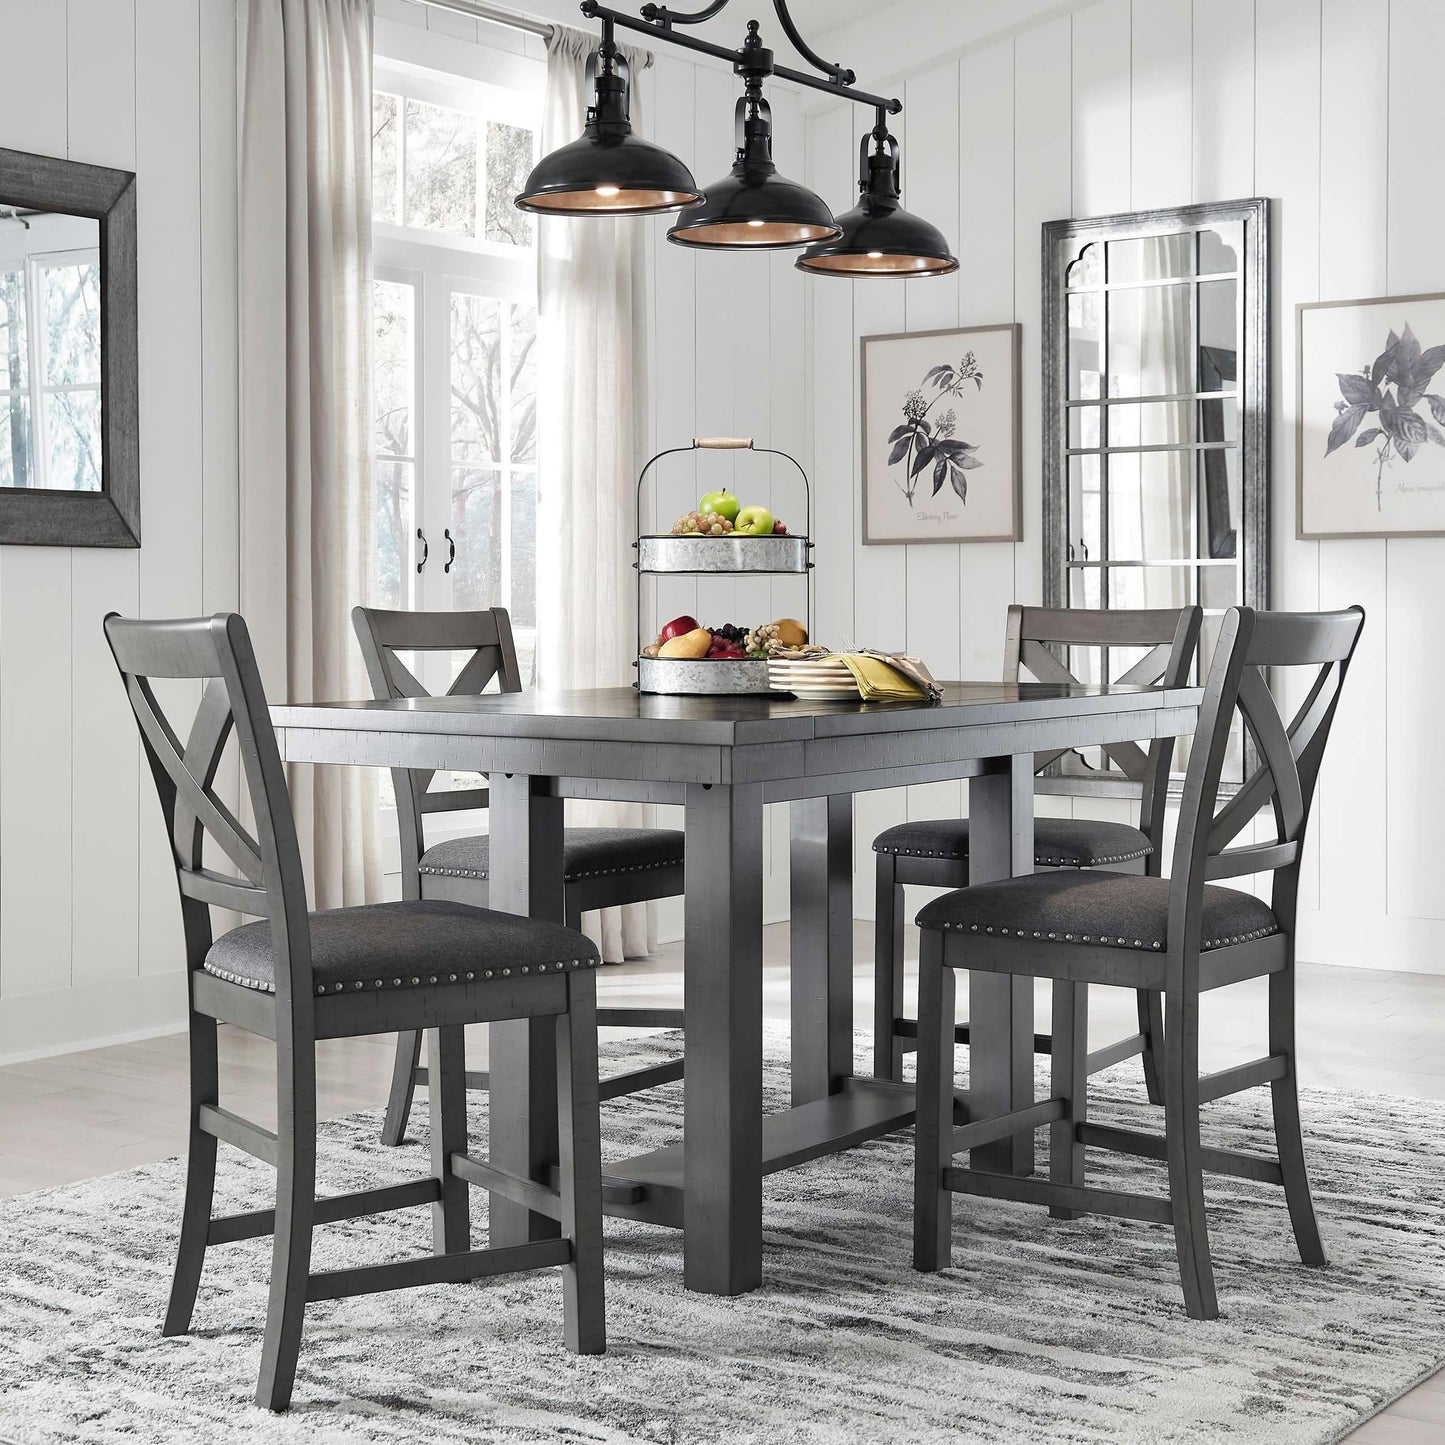 Signature Design by Ashley Myshanna D629D7 5 pc Counter Height Dining Set IMAGE 1